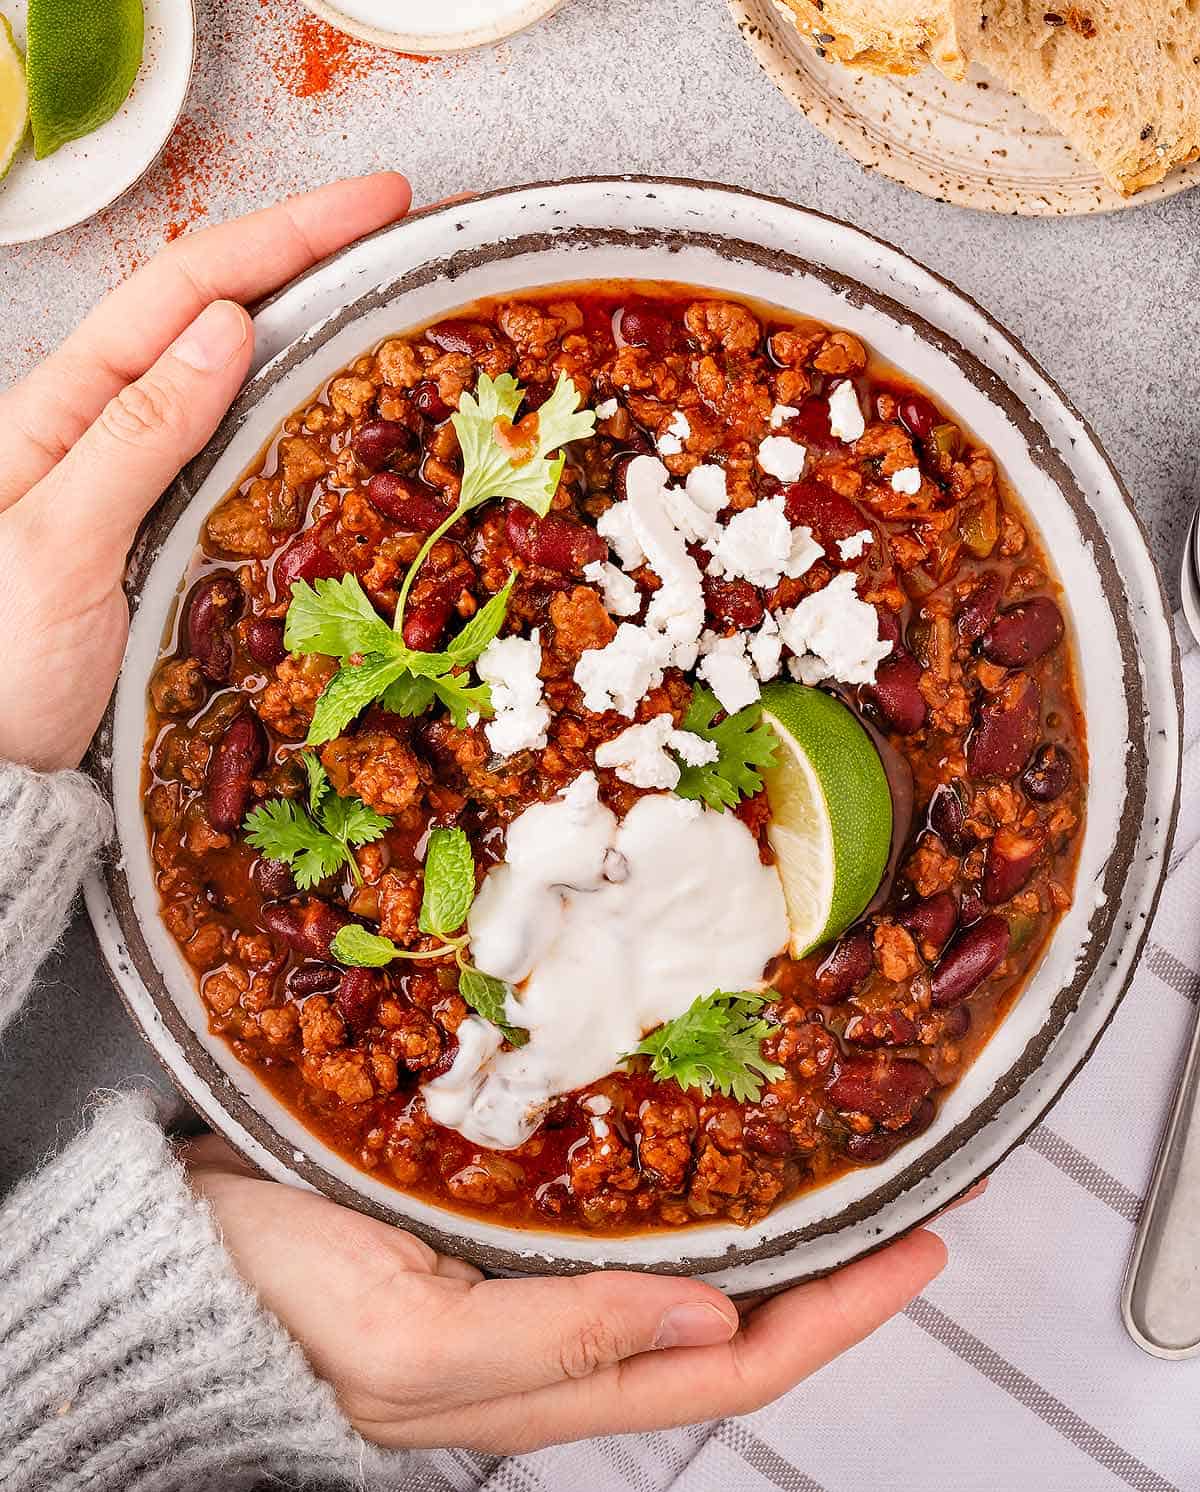 Hands holding a bowl of homemade lamb chili.